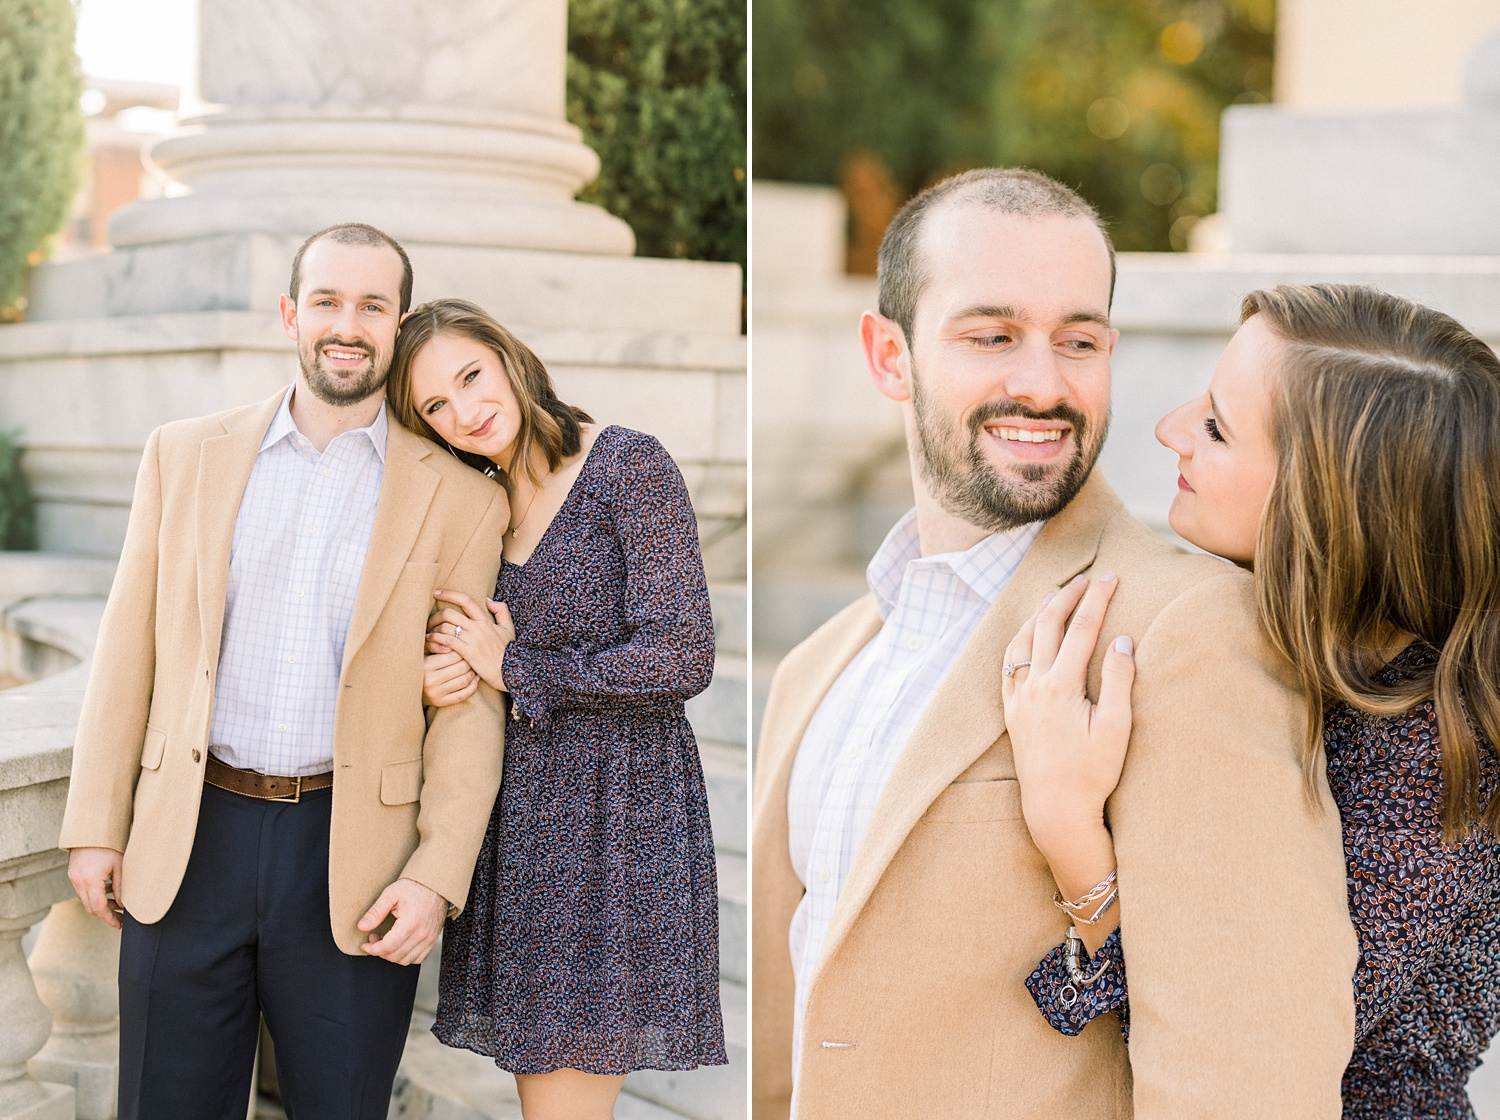 Downtown Birmingham engagement session with couple in classic attire